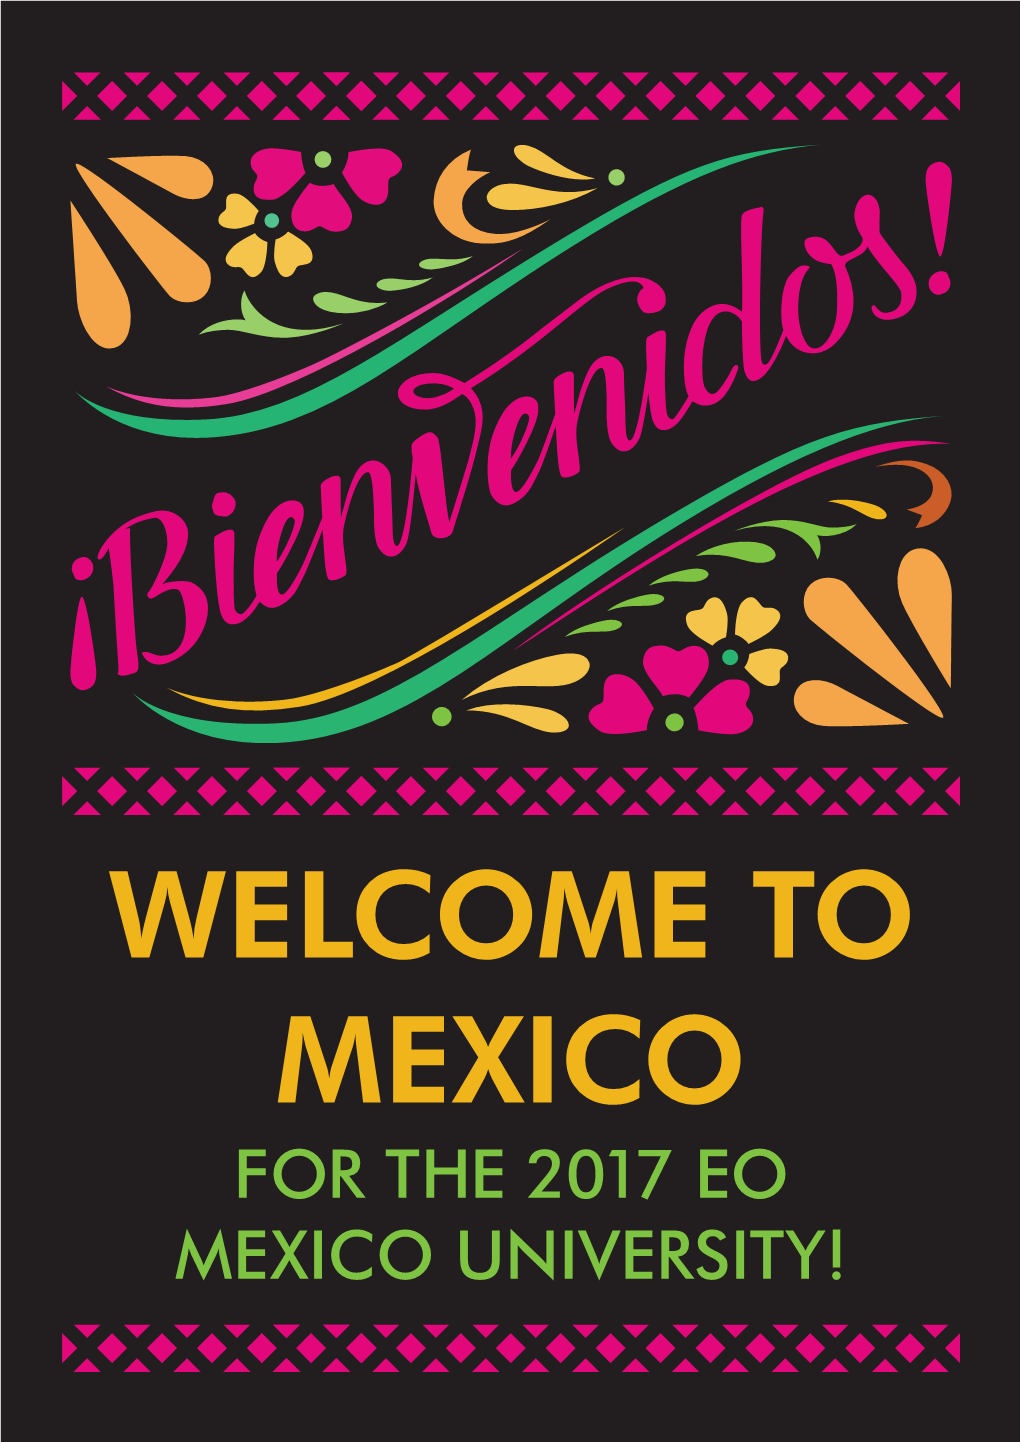 FOR the 2017 EO MEXICO UNIVERSITY! Continually Cited by Travel Enthusiasts Across the World As a Must-Visit Destination, Mexico City Has So Much to Offer